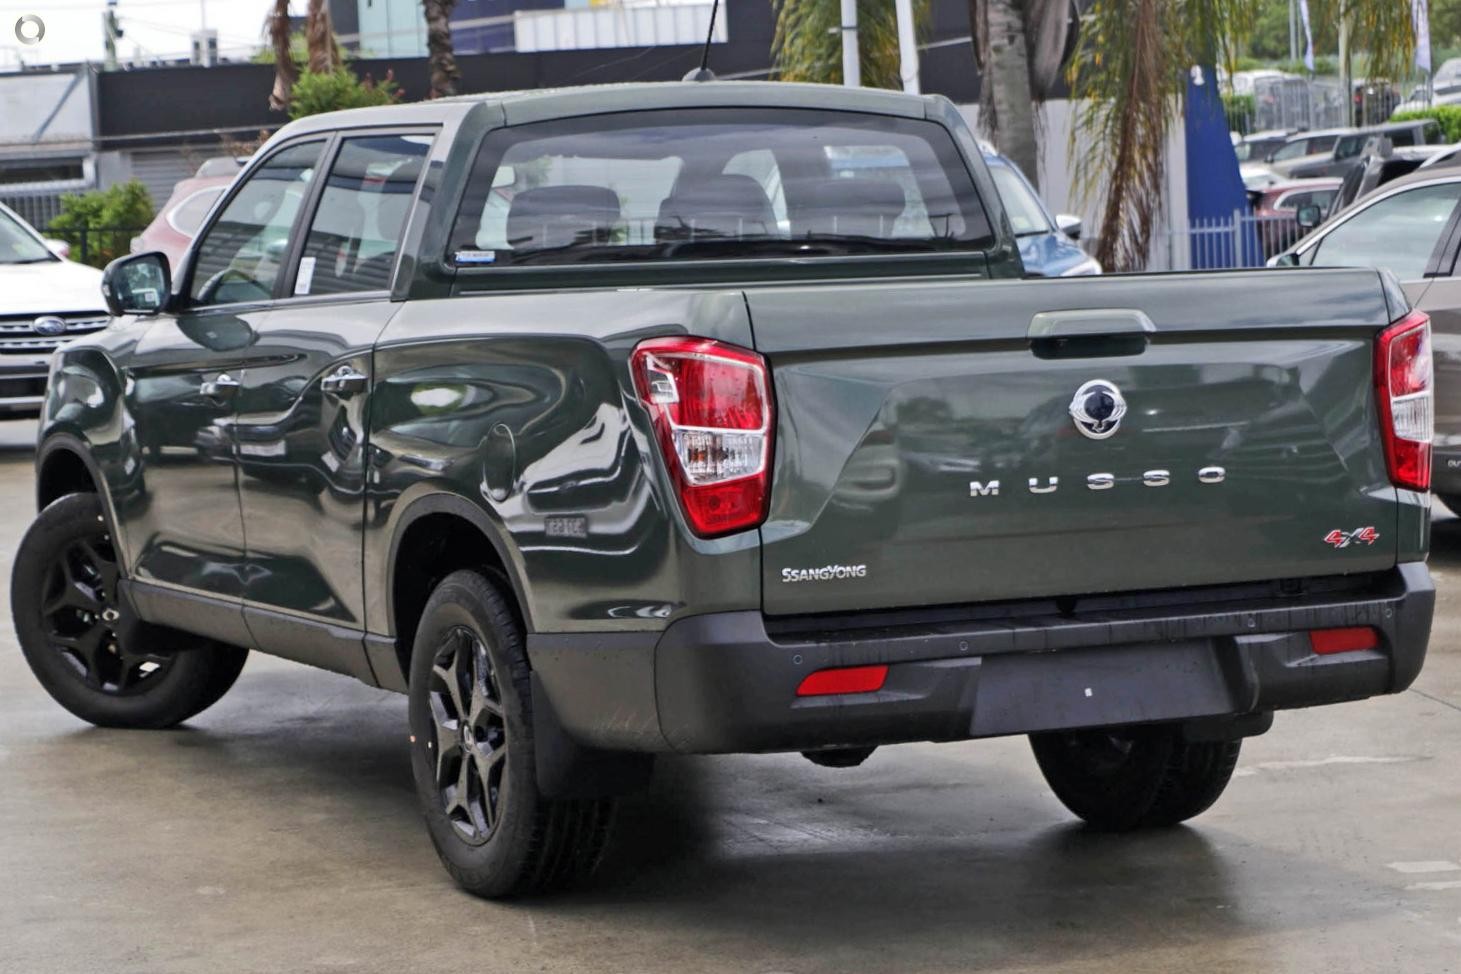 Ssangyong Musso image 4